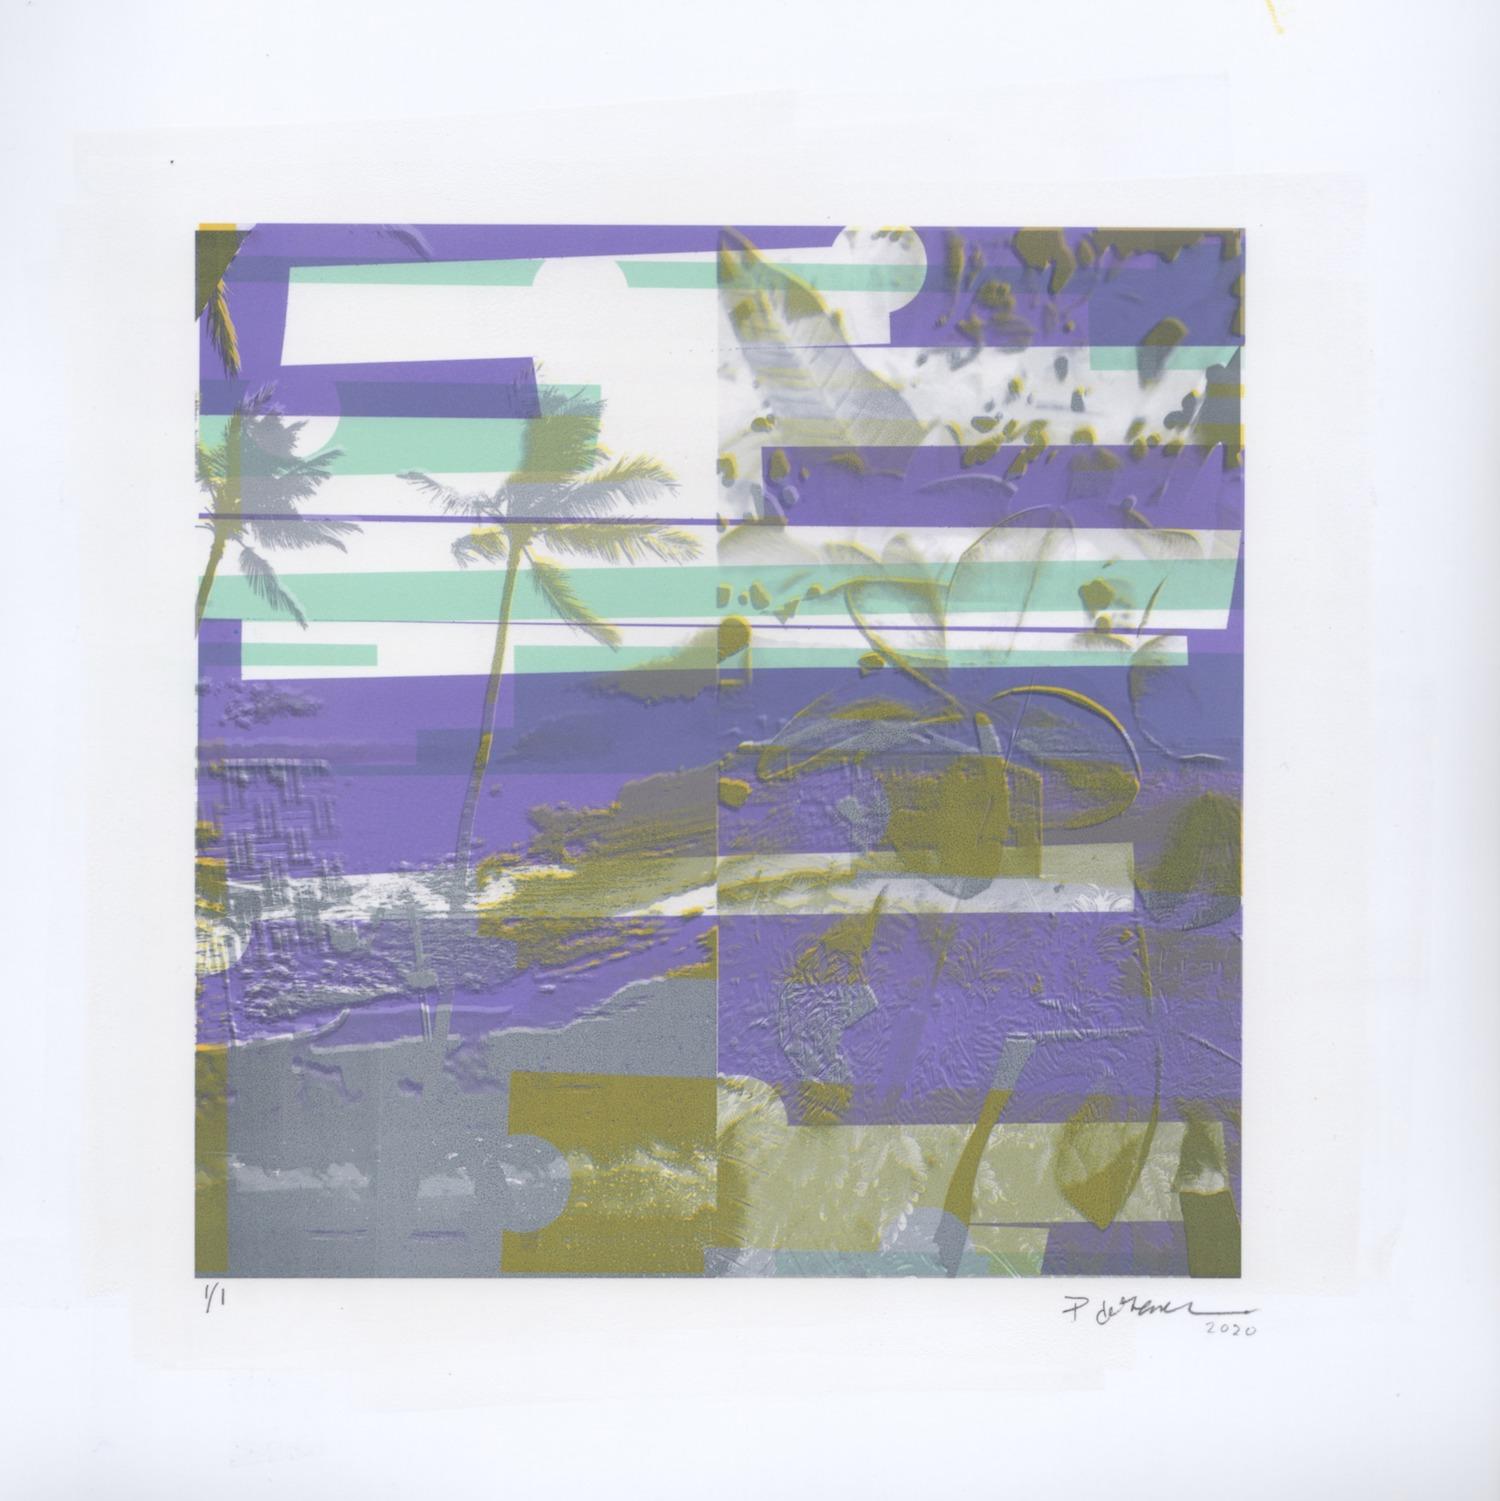 "Kauai, Tranquility", abstract, landscape, lavender, green, turquoise, print